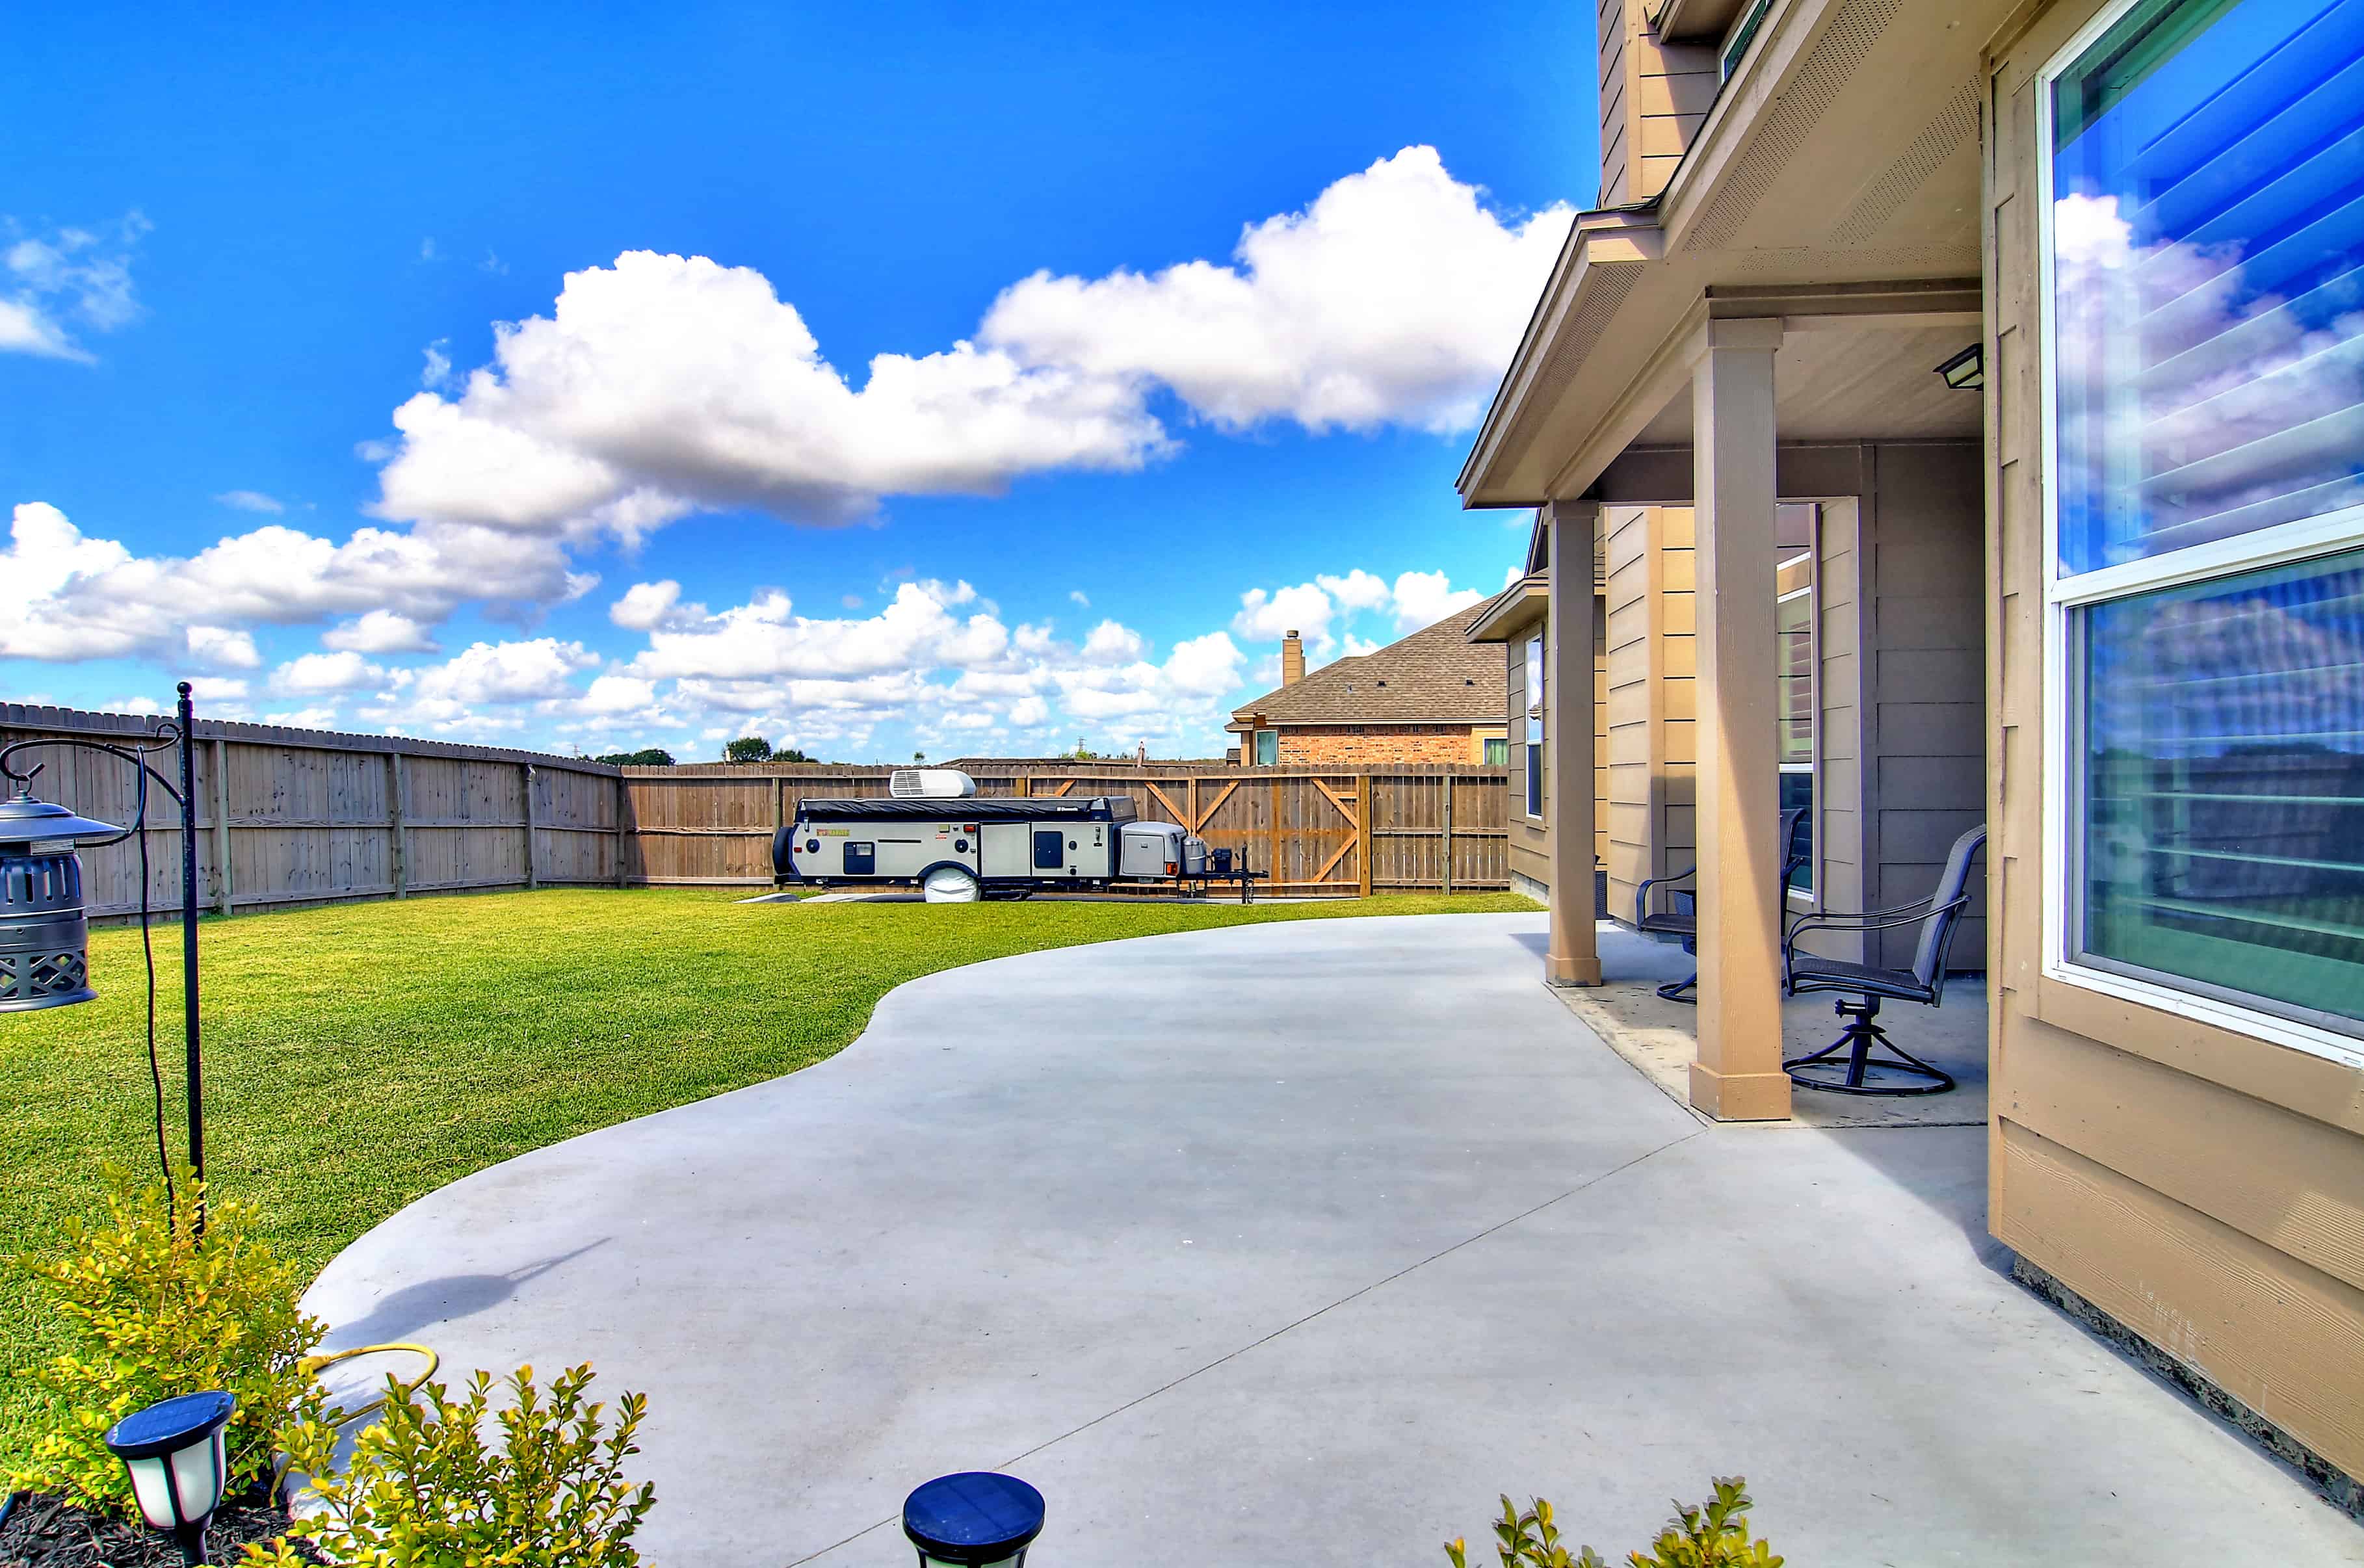 Real Estate Properties for Sale in Rancho Vista Corpus Christi TX - Relax and entertain in the large patio and backyard of this Corpus Christi TX home for sale. 